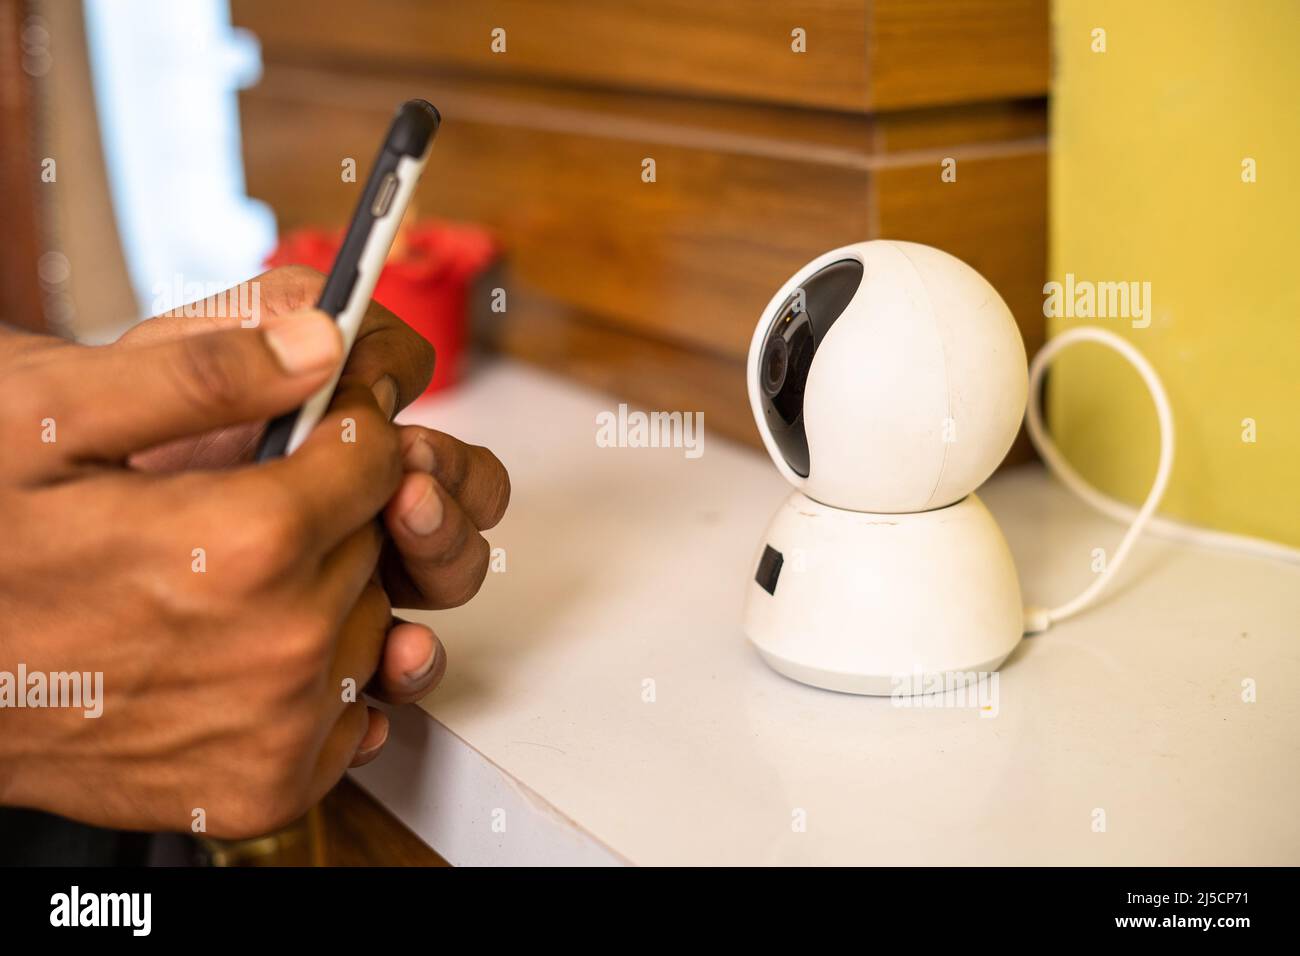 Close up shot of hands scanning smart cctv home surveillance camera on mobile phone at home - concepts of smar home, safety and security. Stock Photo